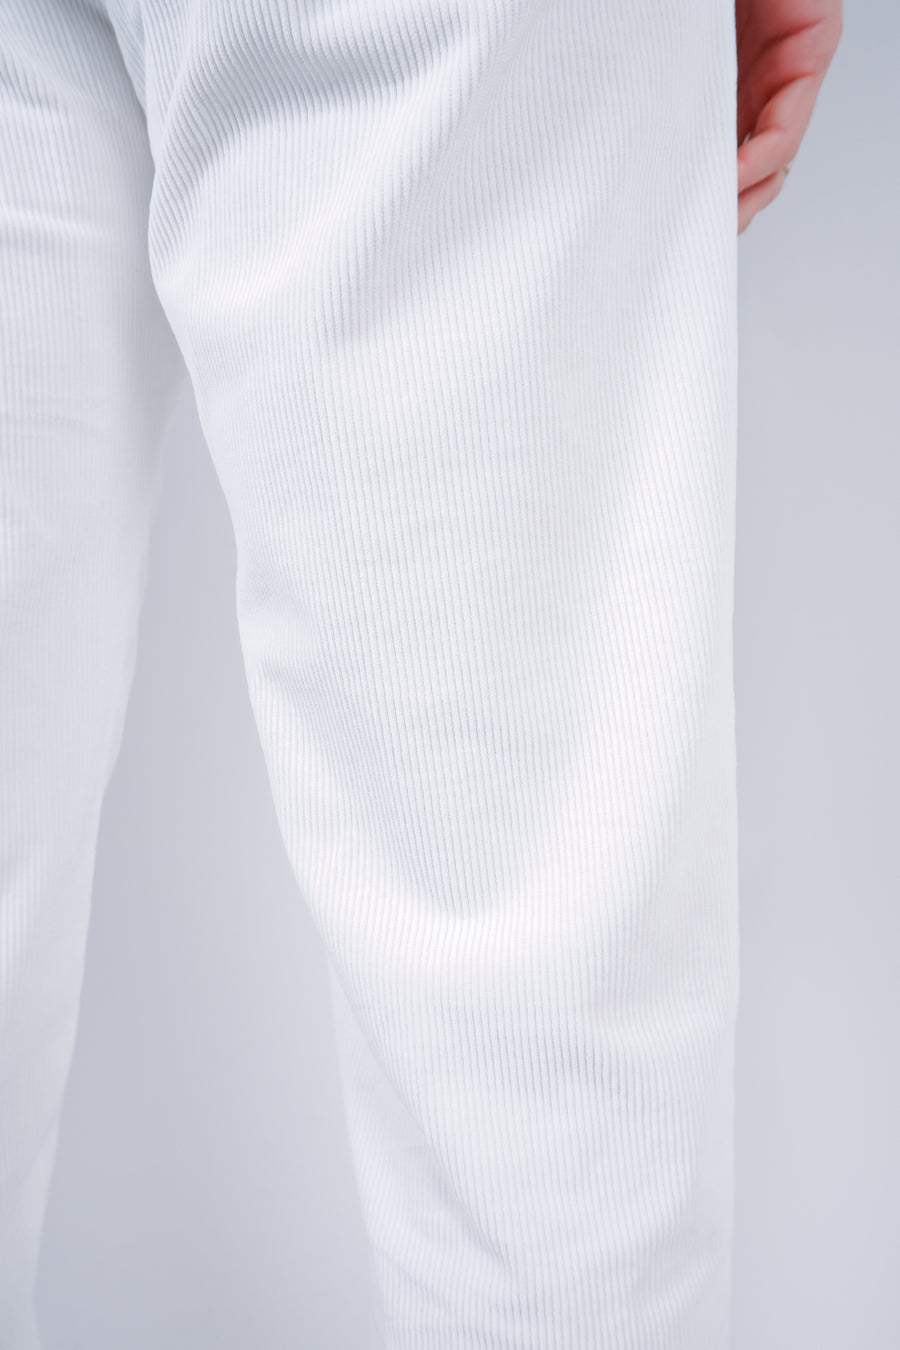 Buy the Briglia Italian Corduroy Trouser in White at Intro. Spend £50 for free UK delivery. Official stockists. We ship worldwide.